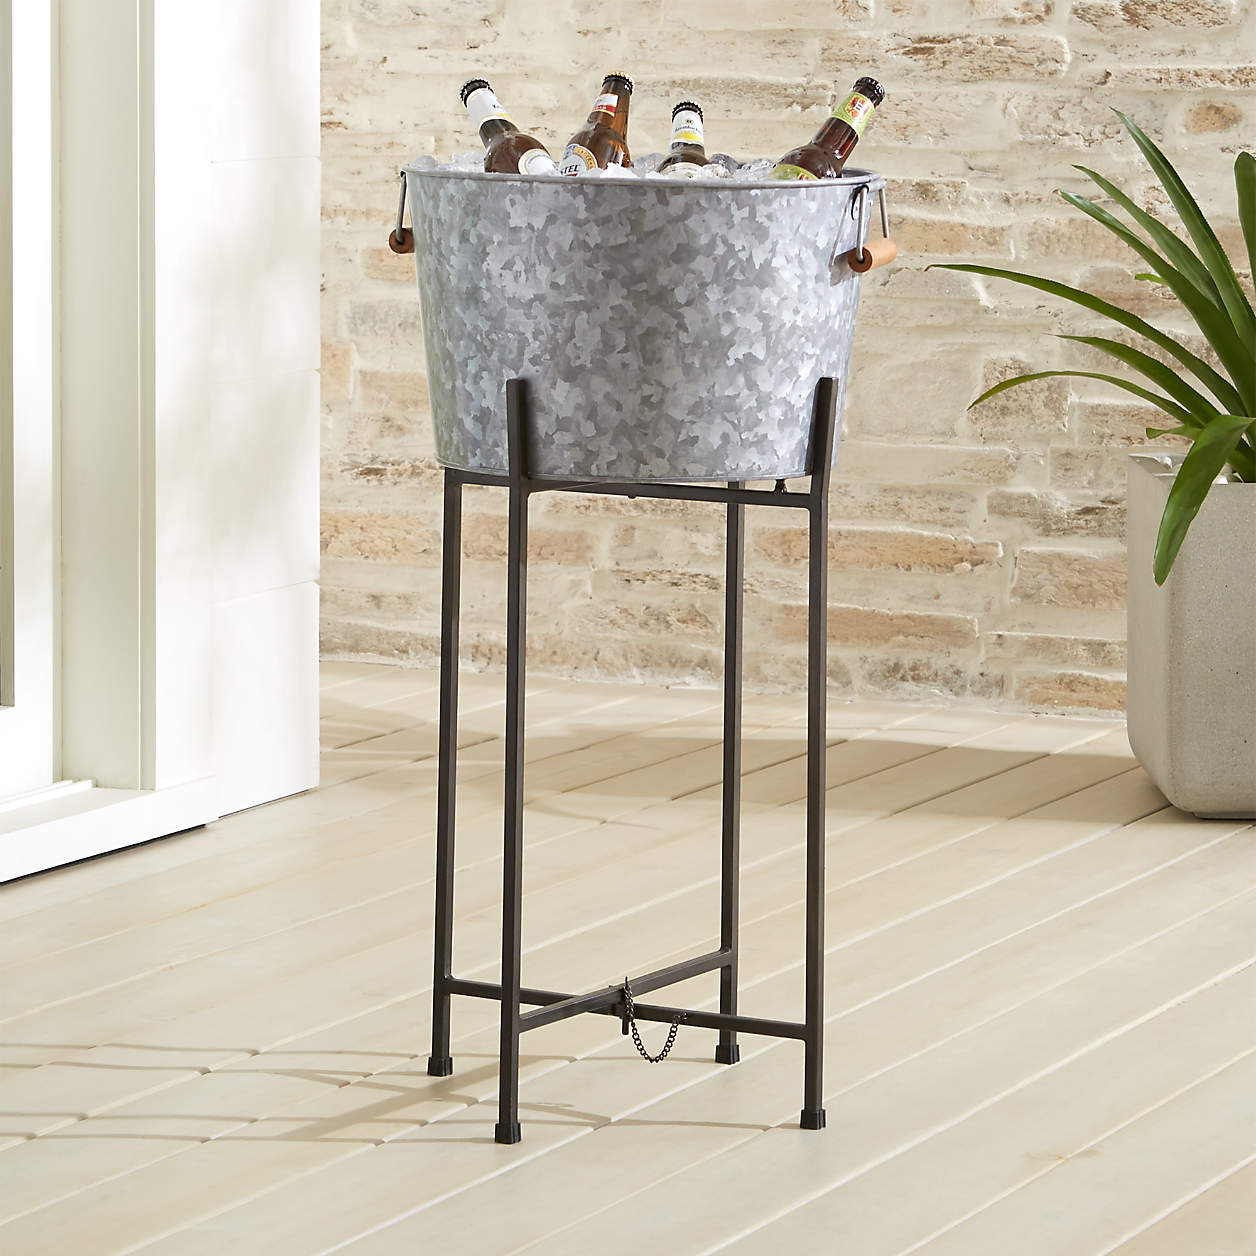 Galvanized Beverage Tub with Black Stand + Reviews | Crate & Barrel